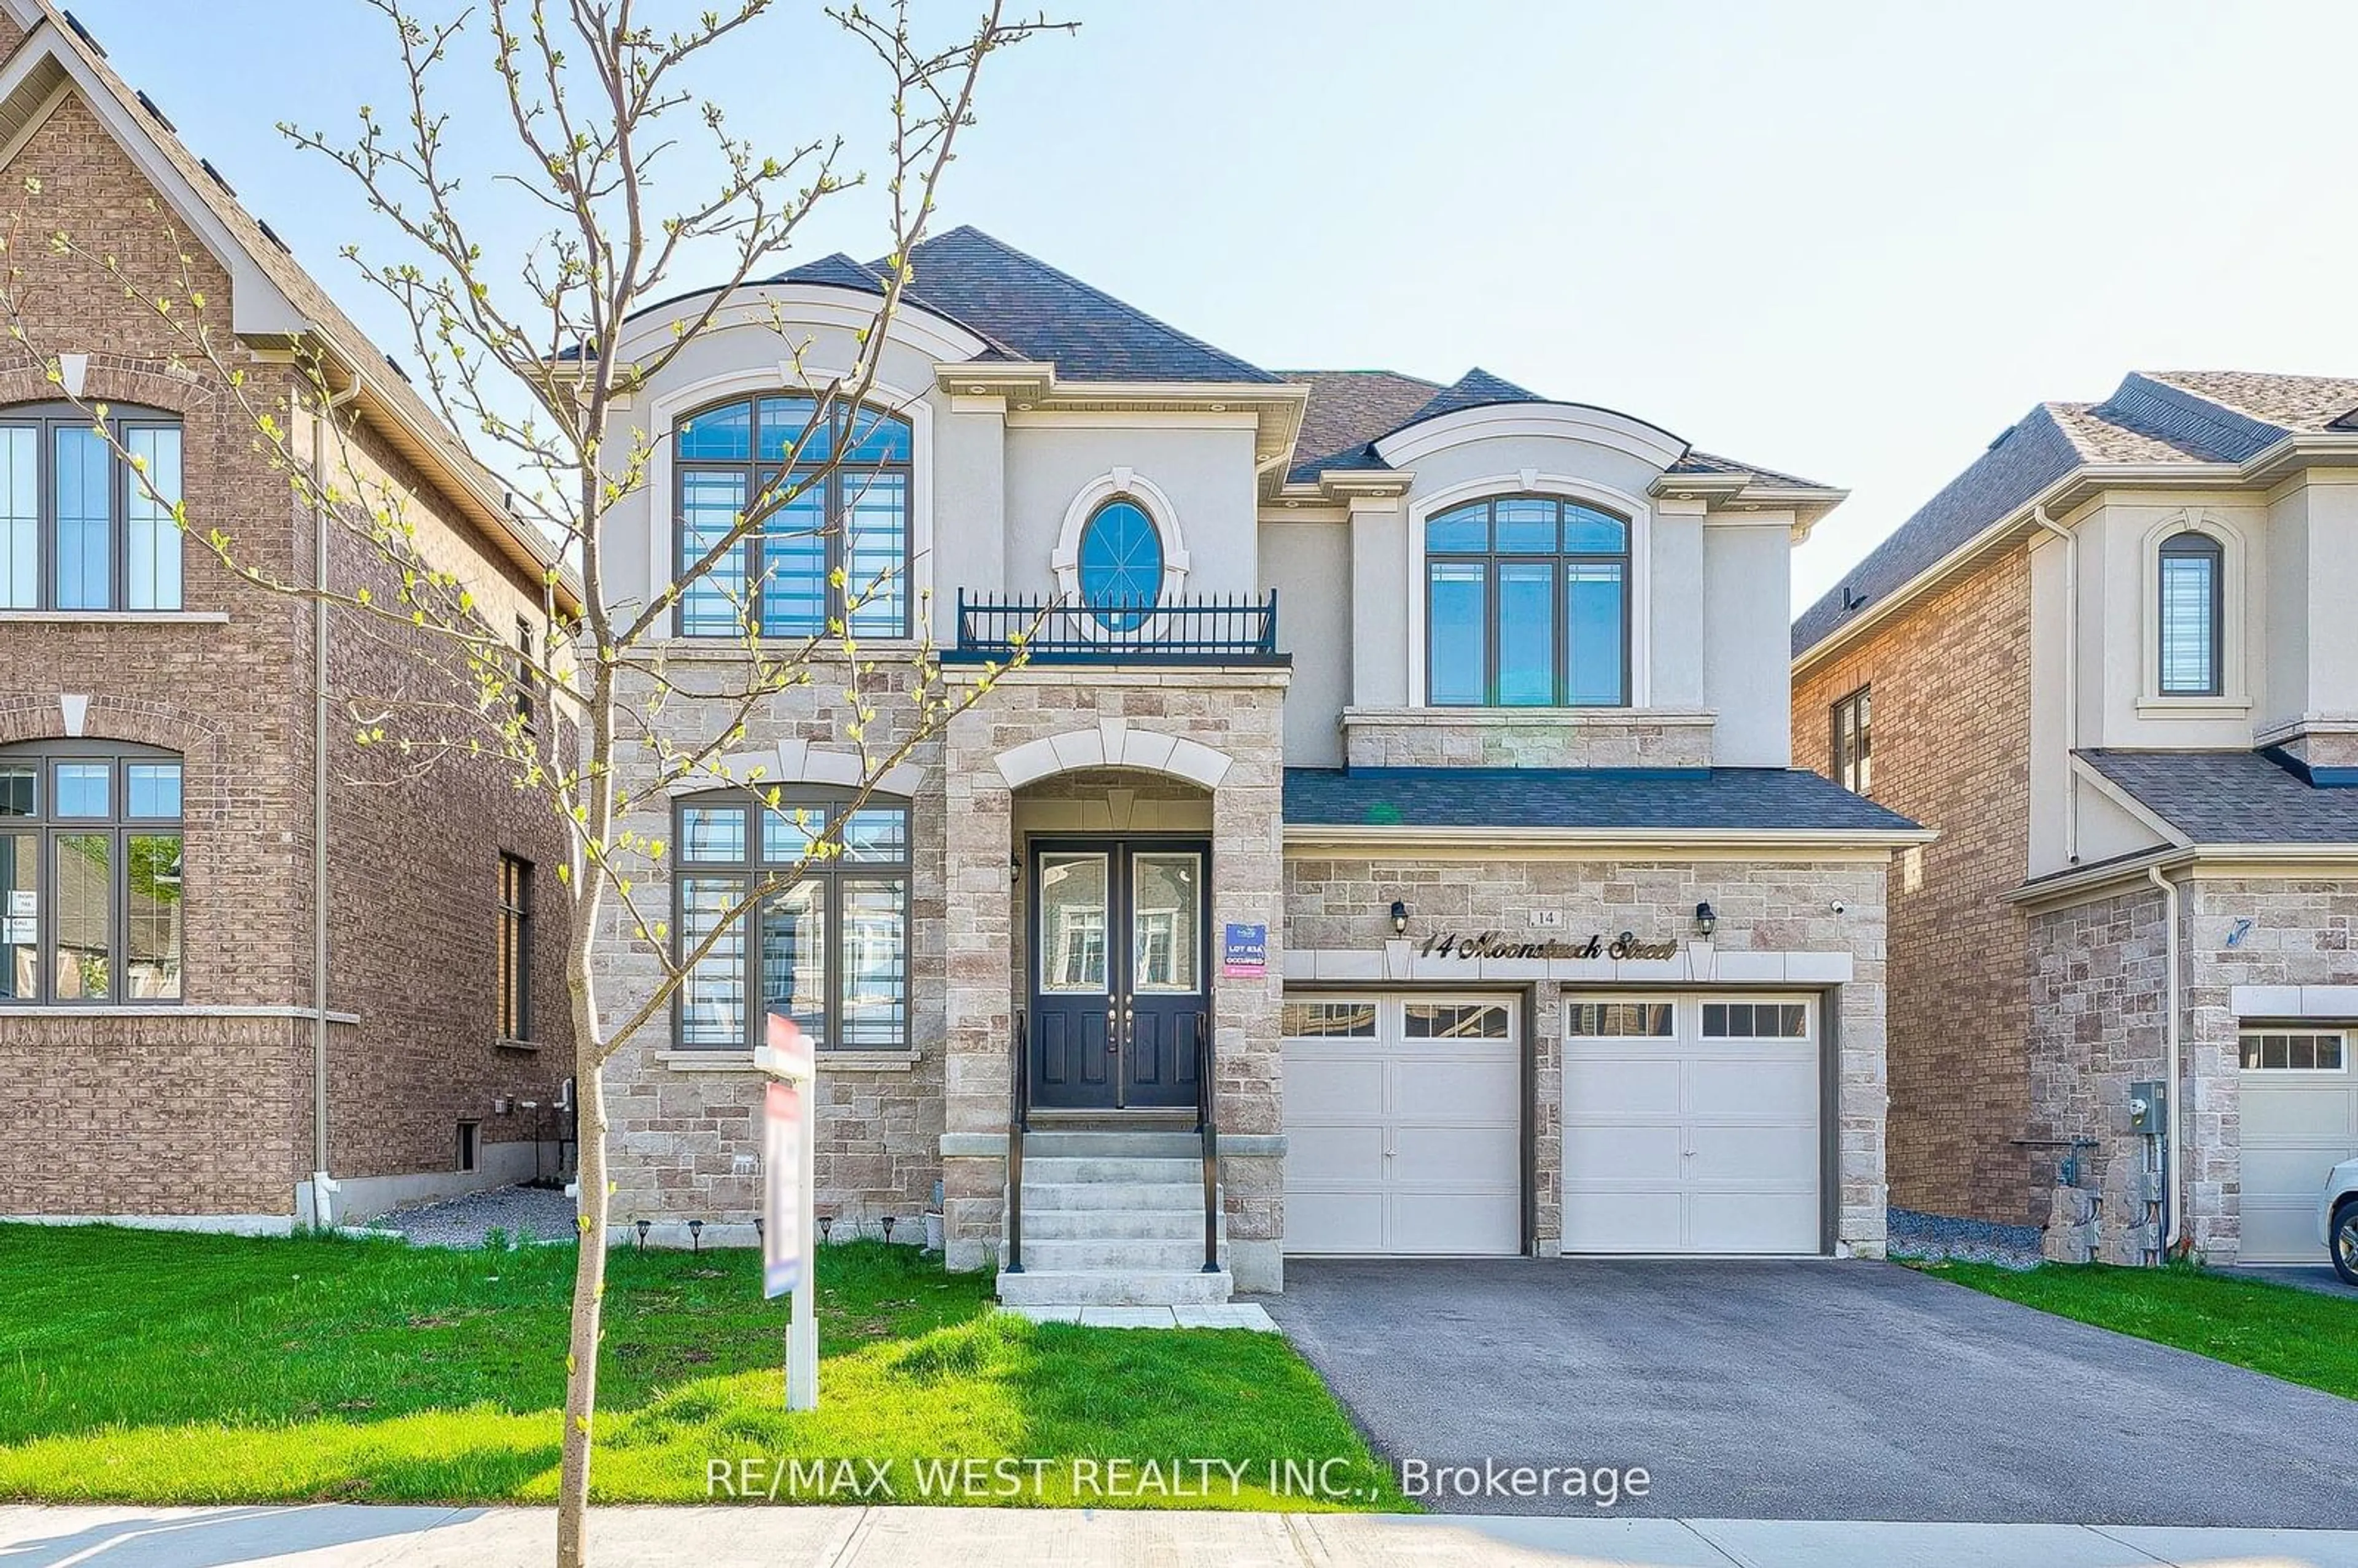 Home with brick exterior material for 14 Moonstruck St, Caledon Ontario L7C 4G3